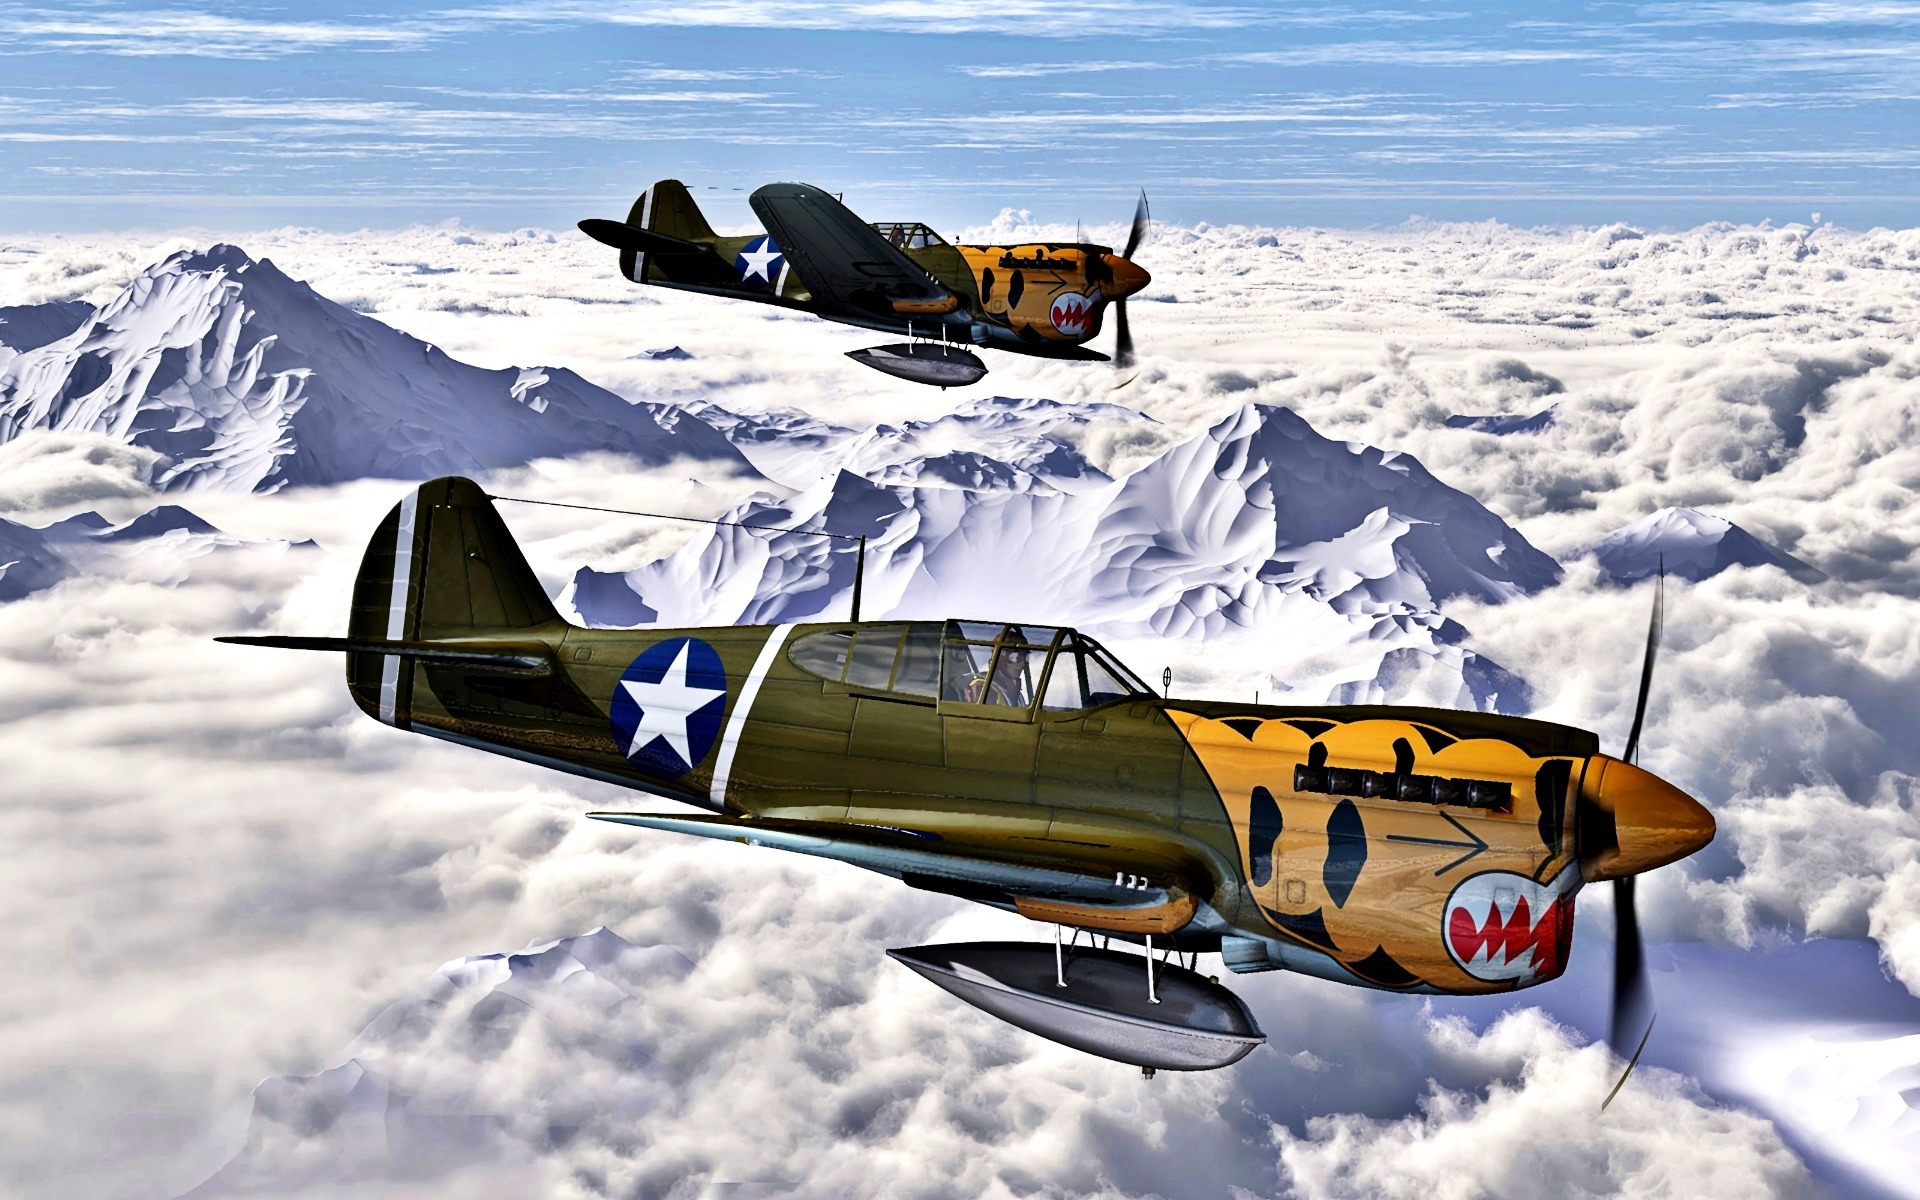 General 1920x1200 artwork military aircraft vehicle aircraft military military vehicle American aircraft clouds mountains snow covered sky Curtiss P-40 Warhawk pilot sunlight snow